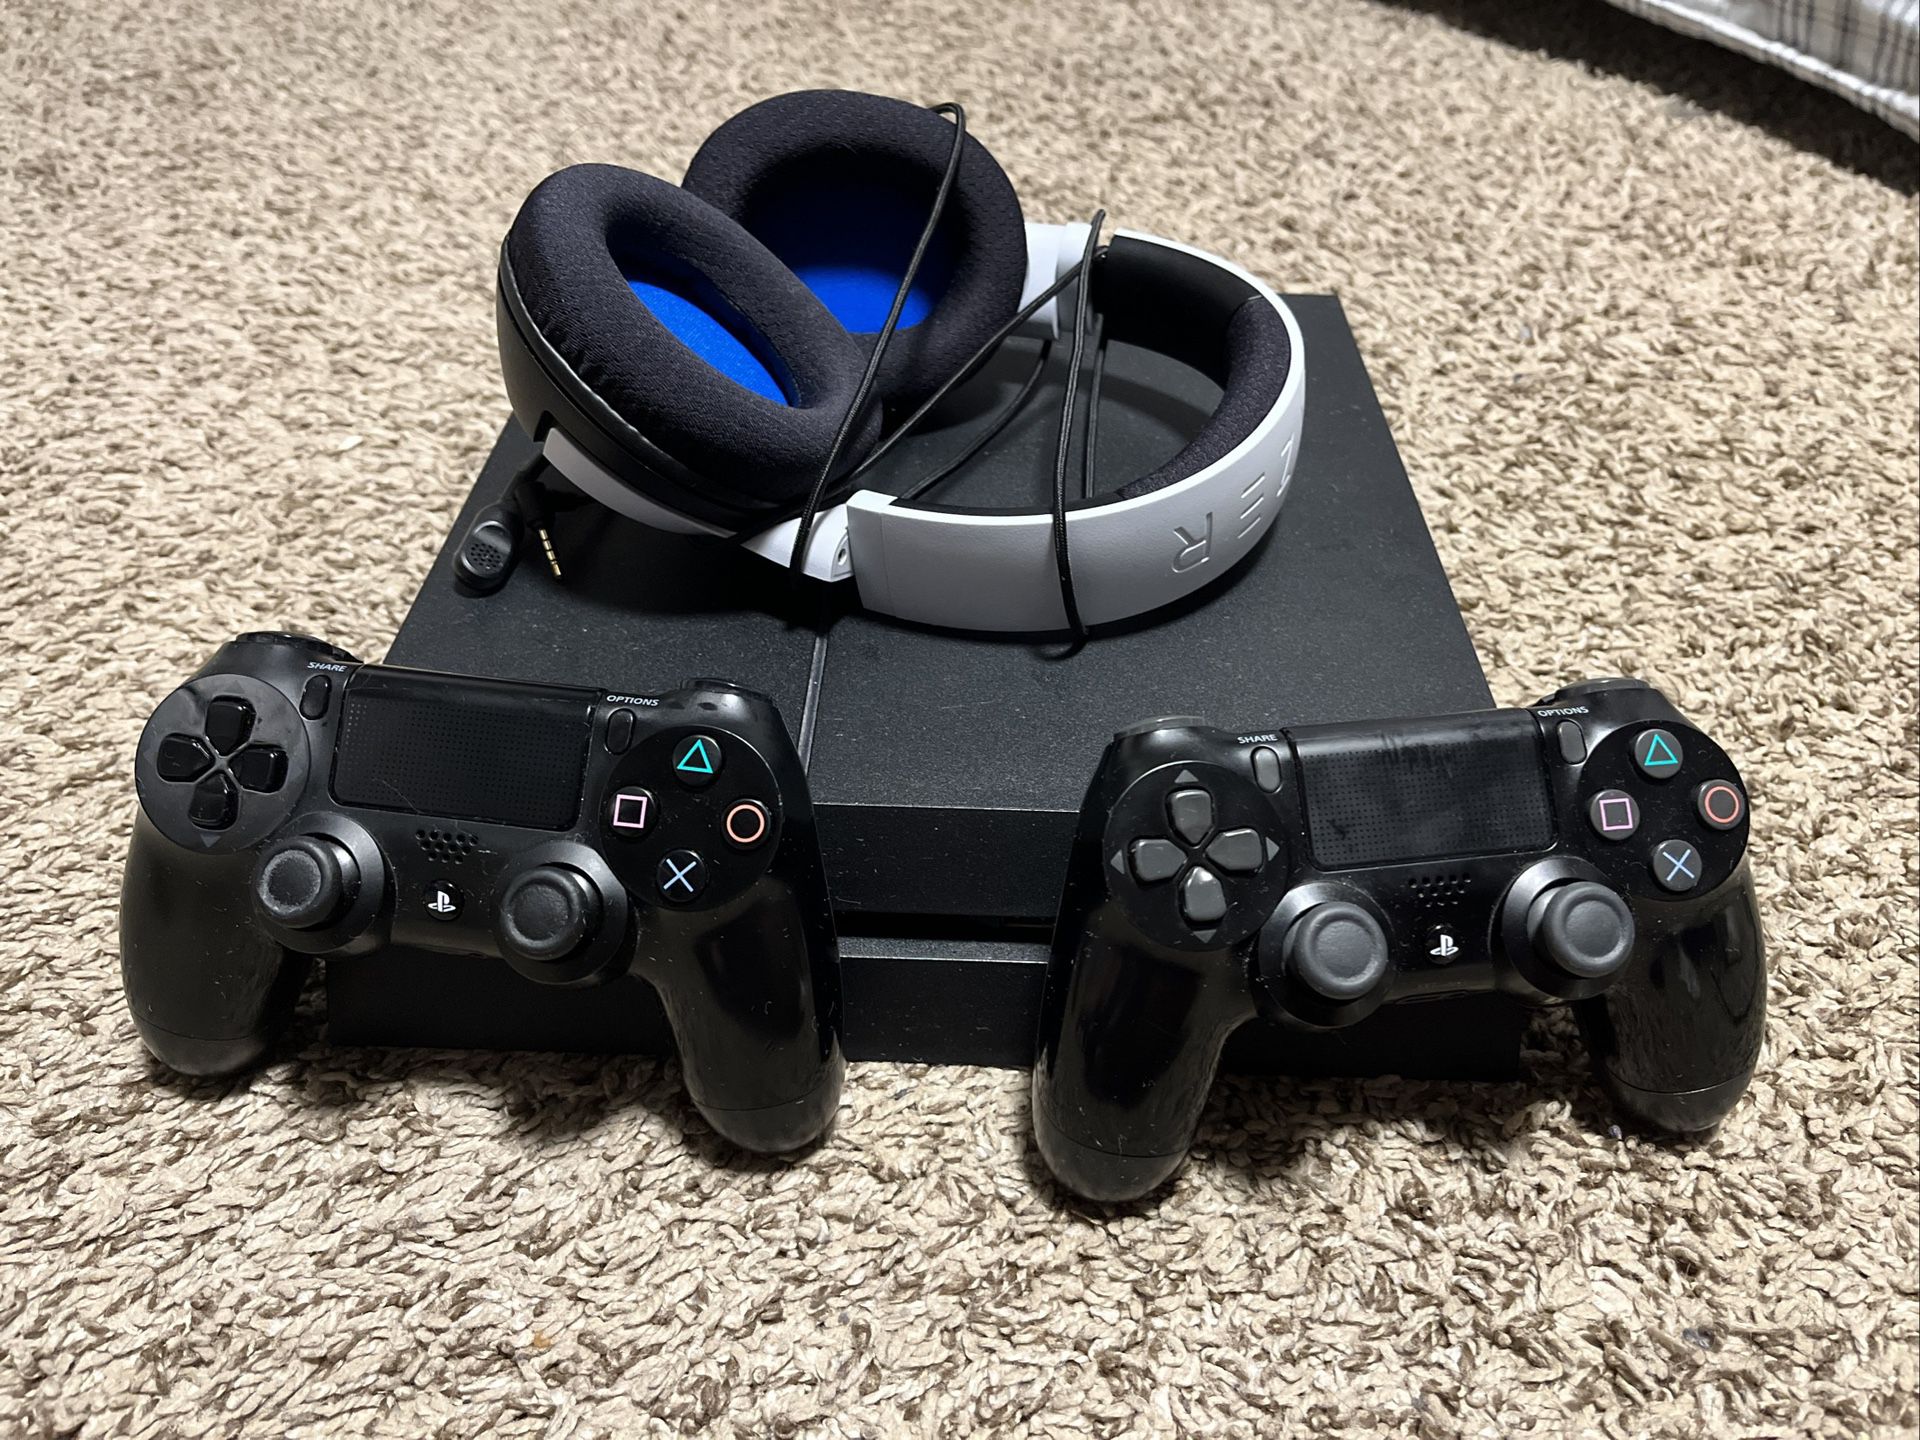 Console 500GB - 2 Controllers, Headset, with Cables; Great Condition for Sale Farmington, MI - OfferUp